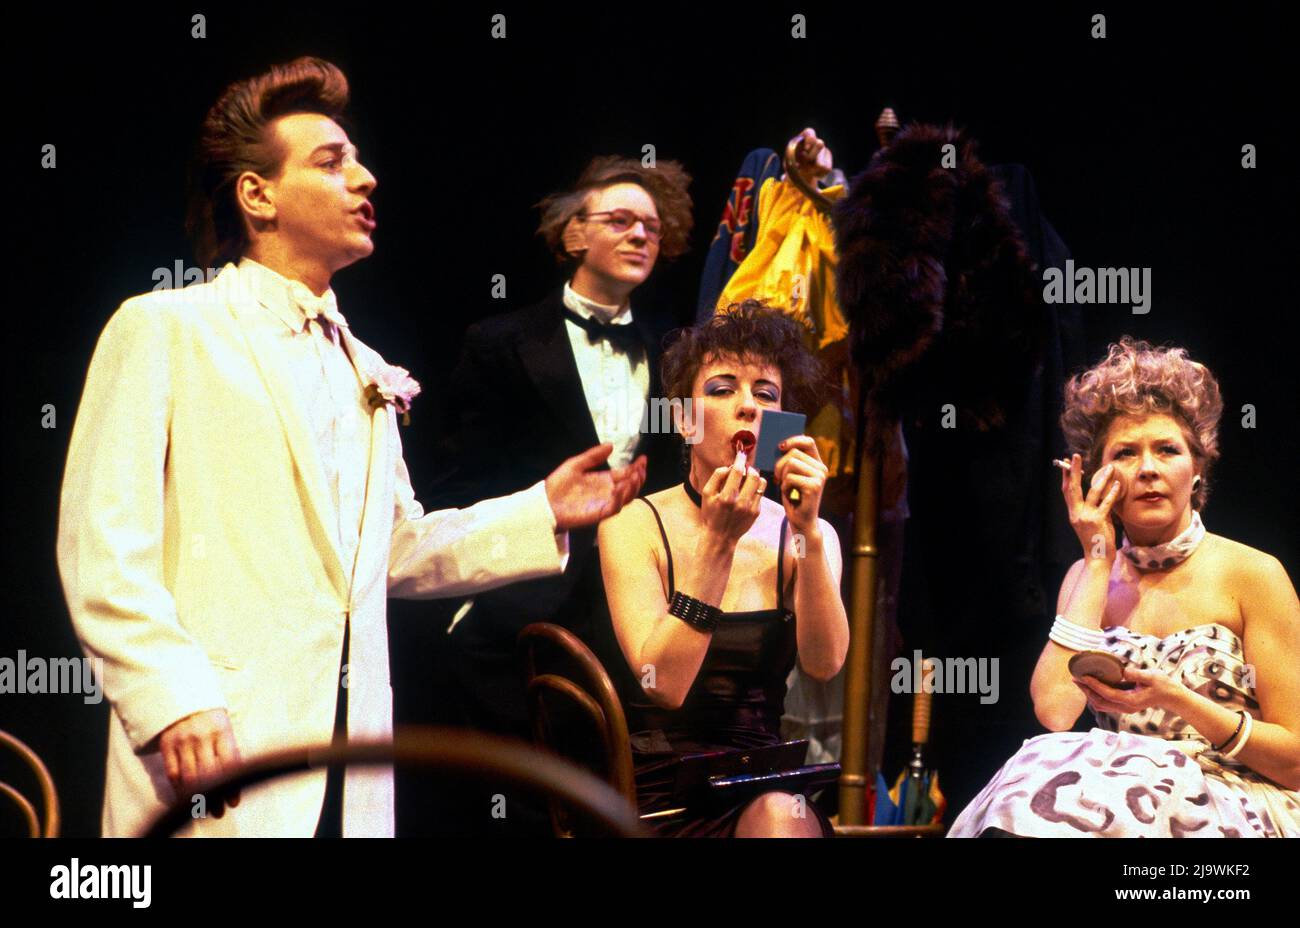 l-r: Billy McColl (Phil McCann), Iain Andrew (Hector McKenzie), Elaine Collins (Lucille), Stella Gonet (Bernadette) in CUTTIN’ A RUG part 2 of THE SLAB BOYS TRILOGY by John Byrne at the Royal Court Theatre, London SW1  18/11/1982  a Traverse Theatre Company production  design: John Byrne  lighting: Colin Scott  director: David Hayman Stock Photo